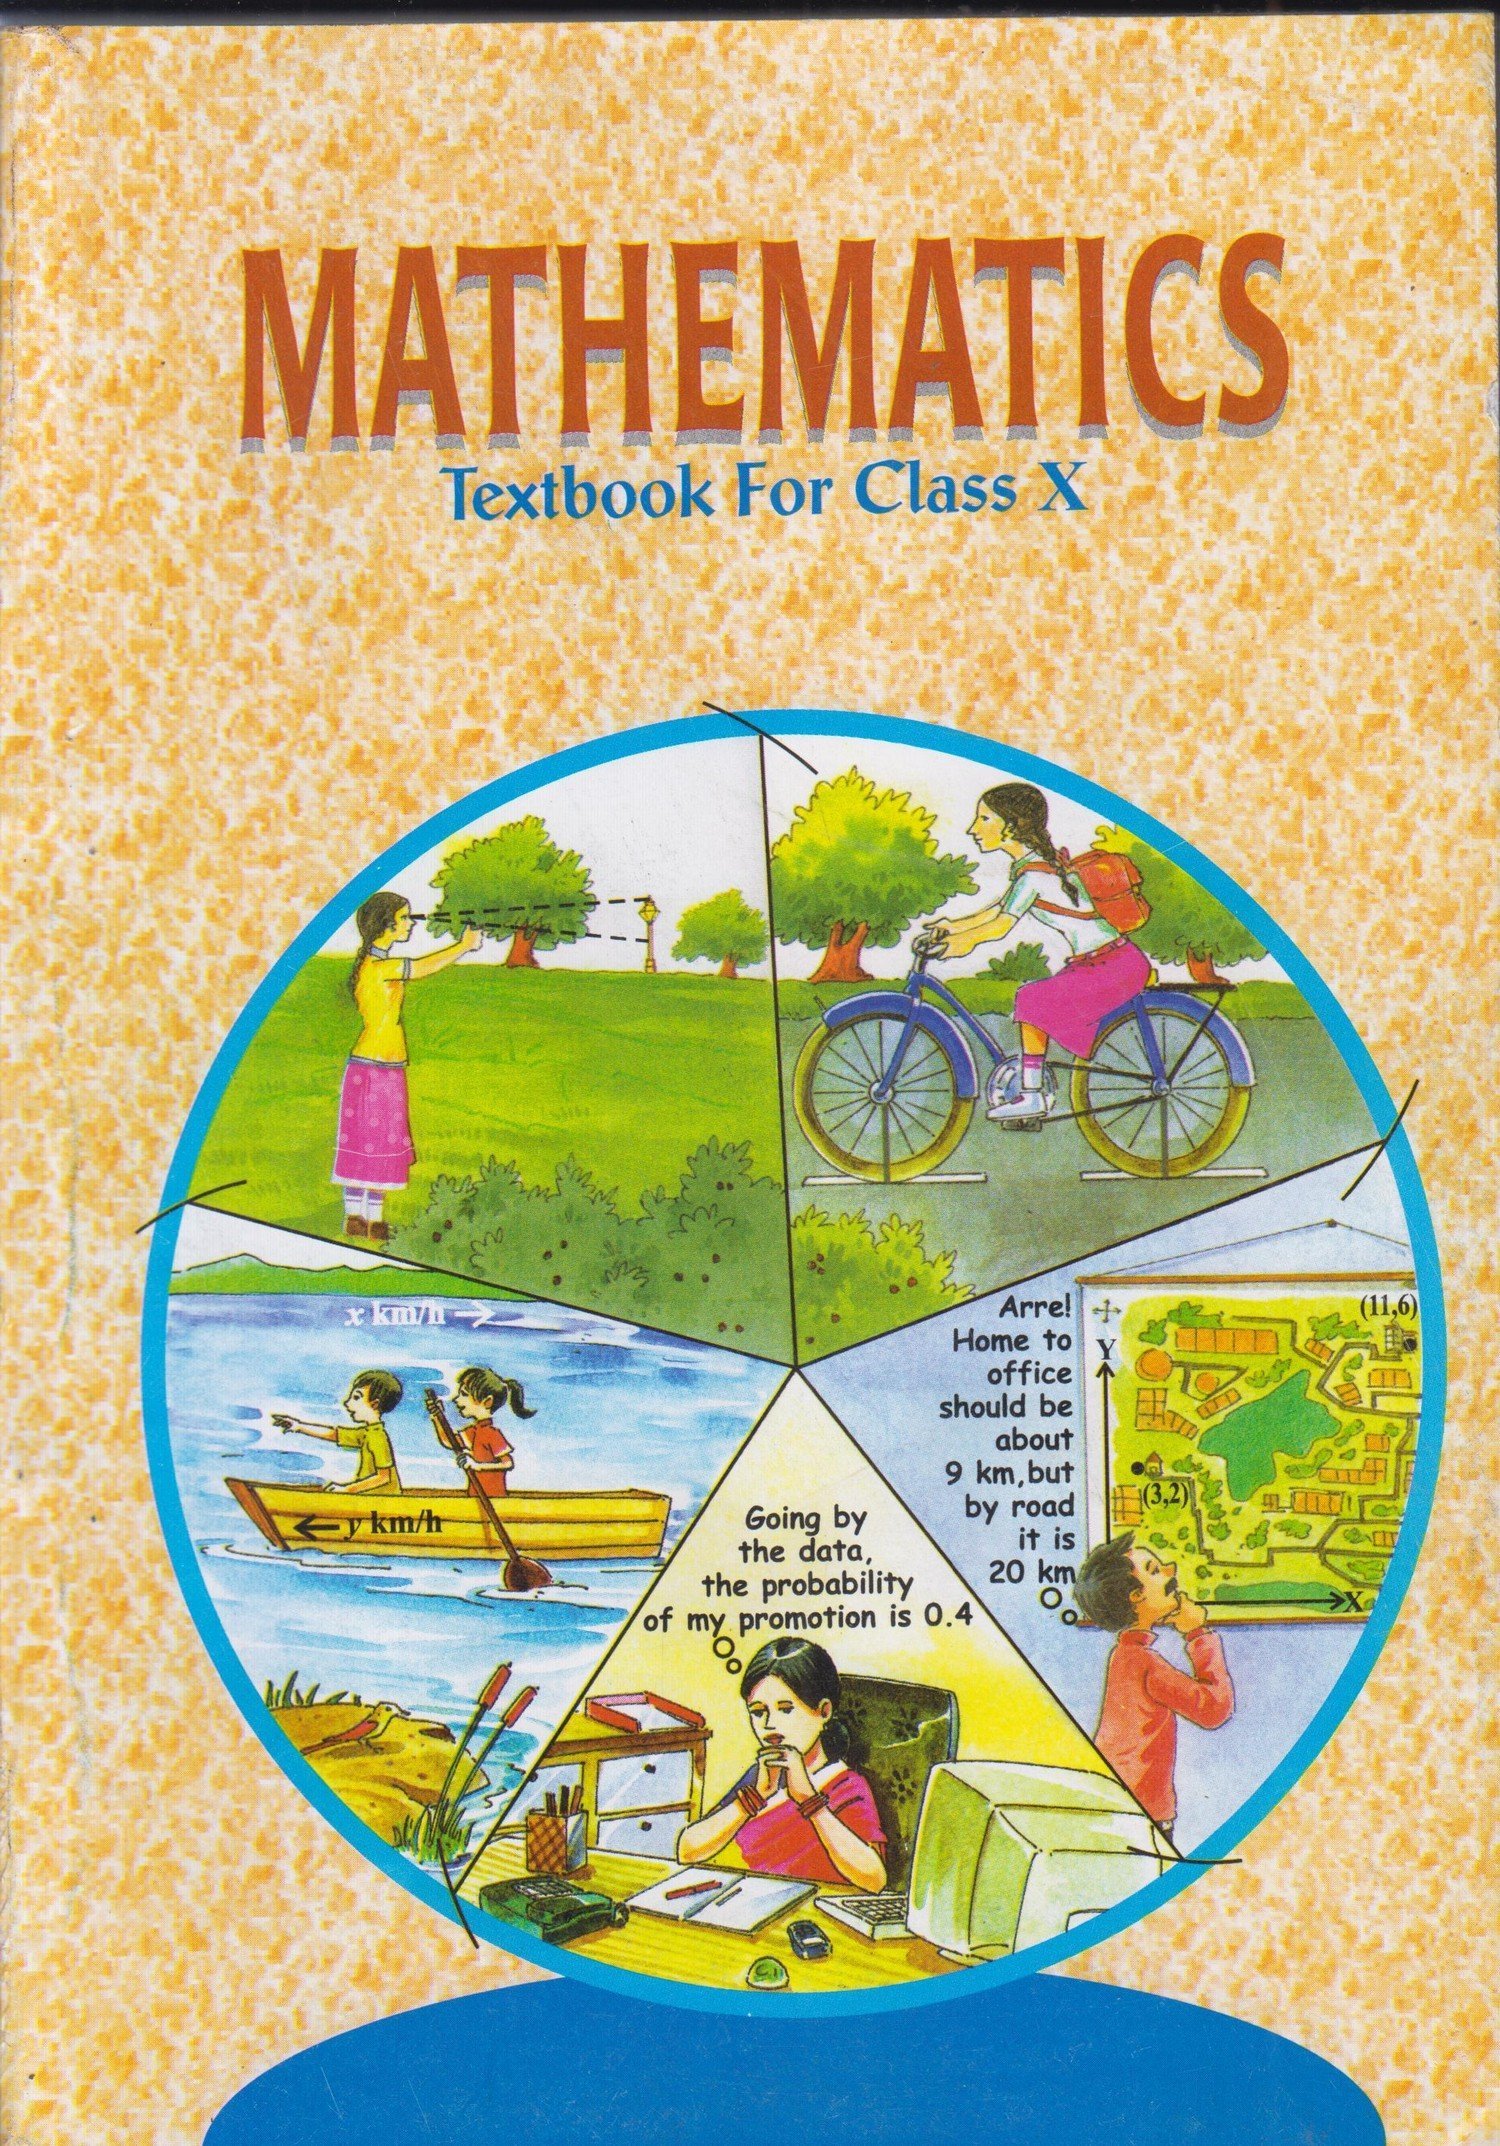 Routemybook - Buy 10th CBSE Mathematics Textbook by NCERT Editorial